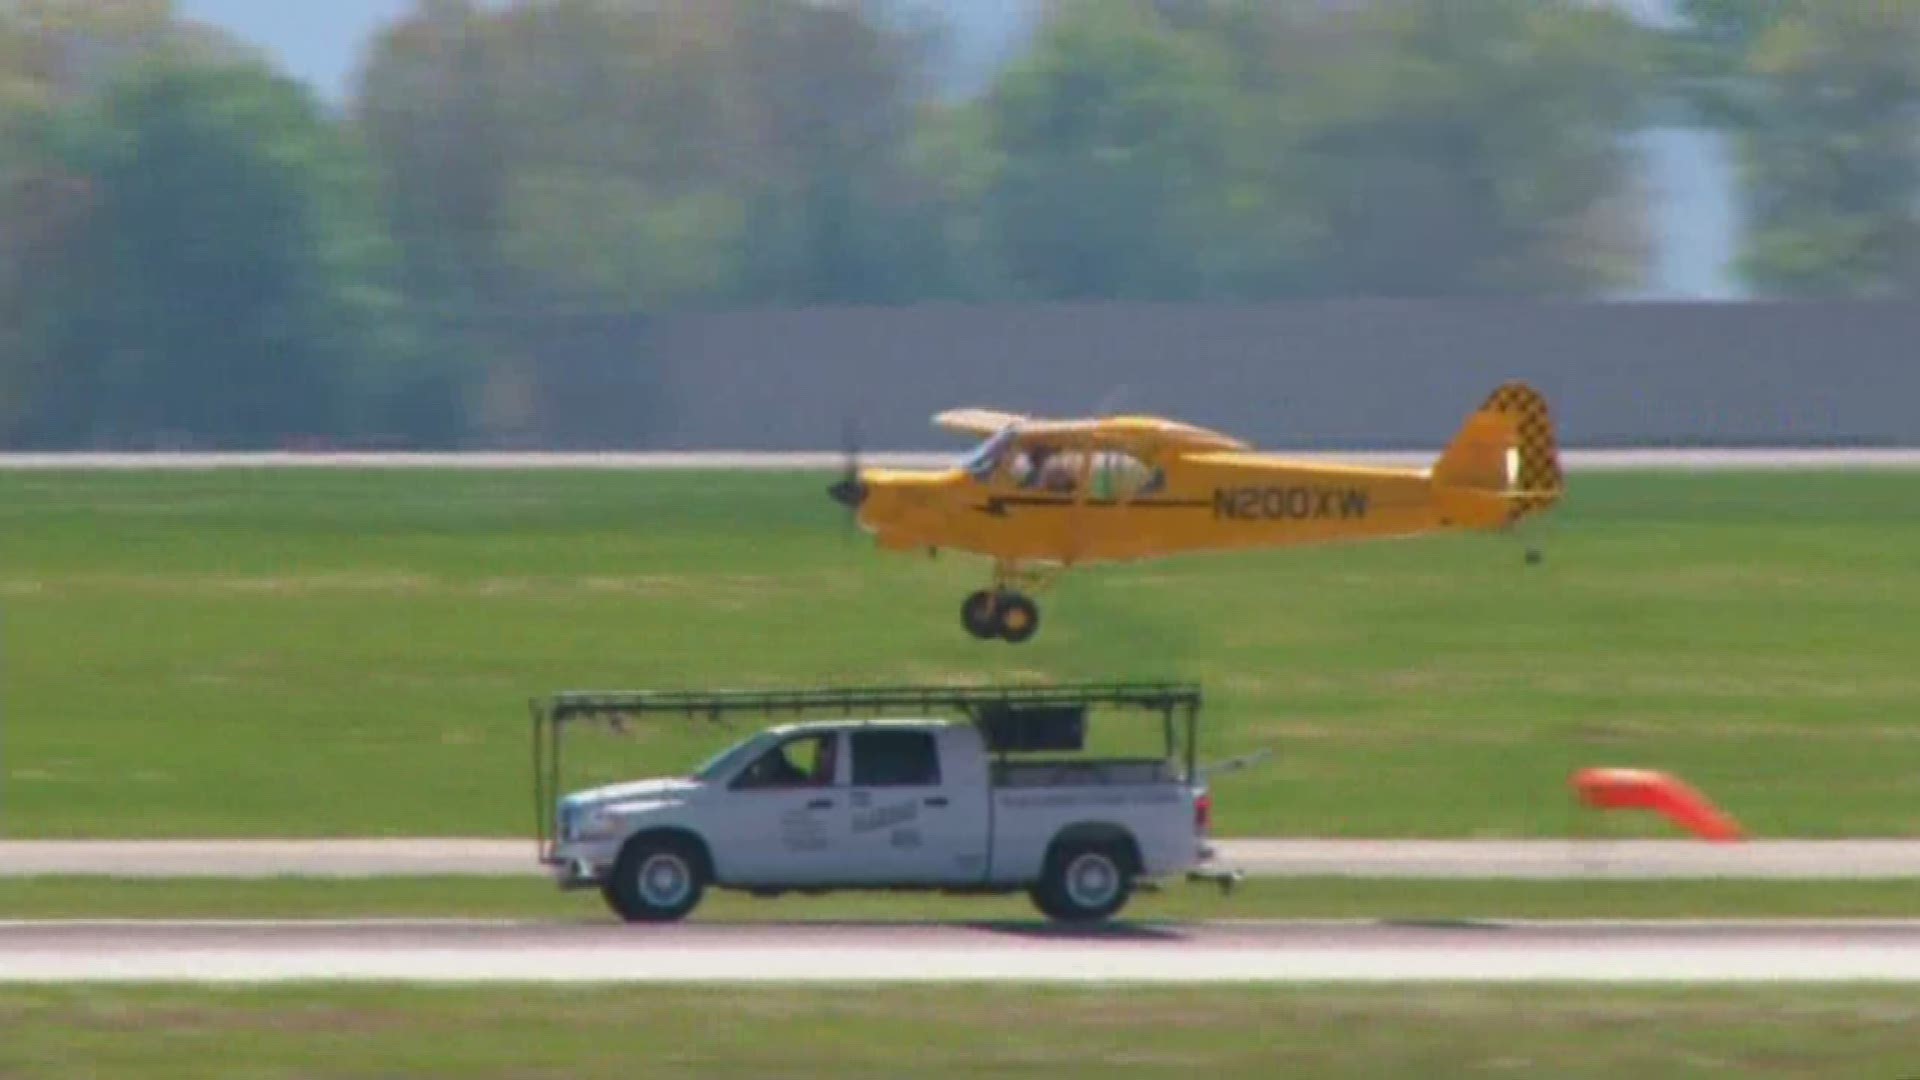 Part 2 of WBIR's hour-long special featuring the return of the Smoky Mountain Air Show. (4/21/16)